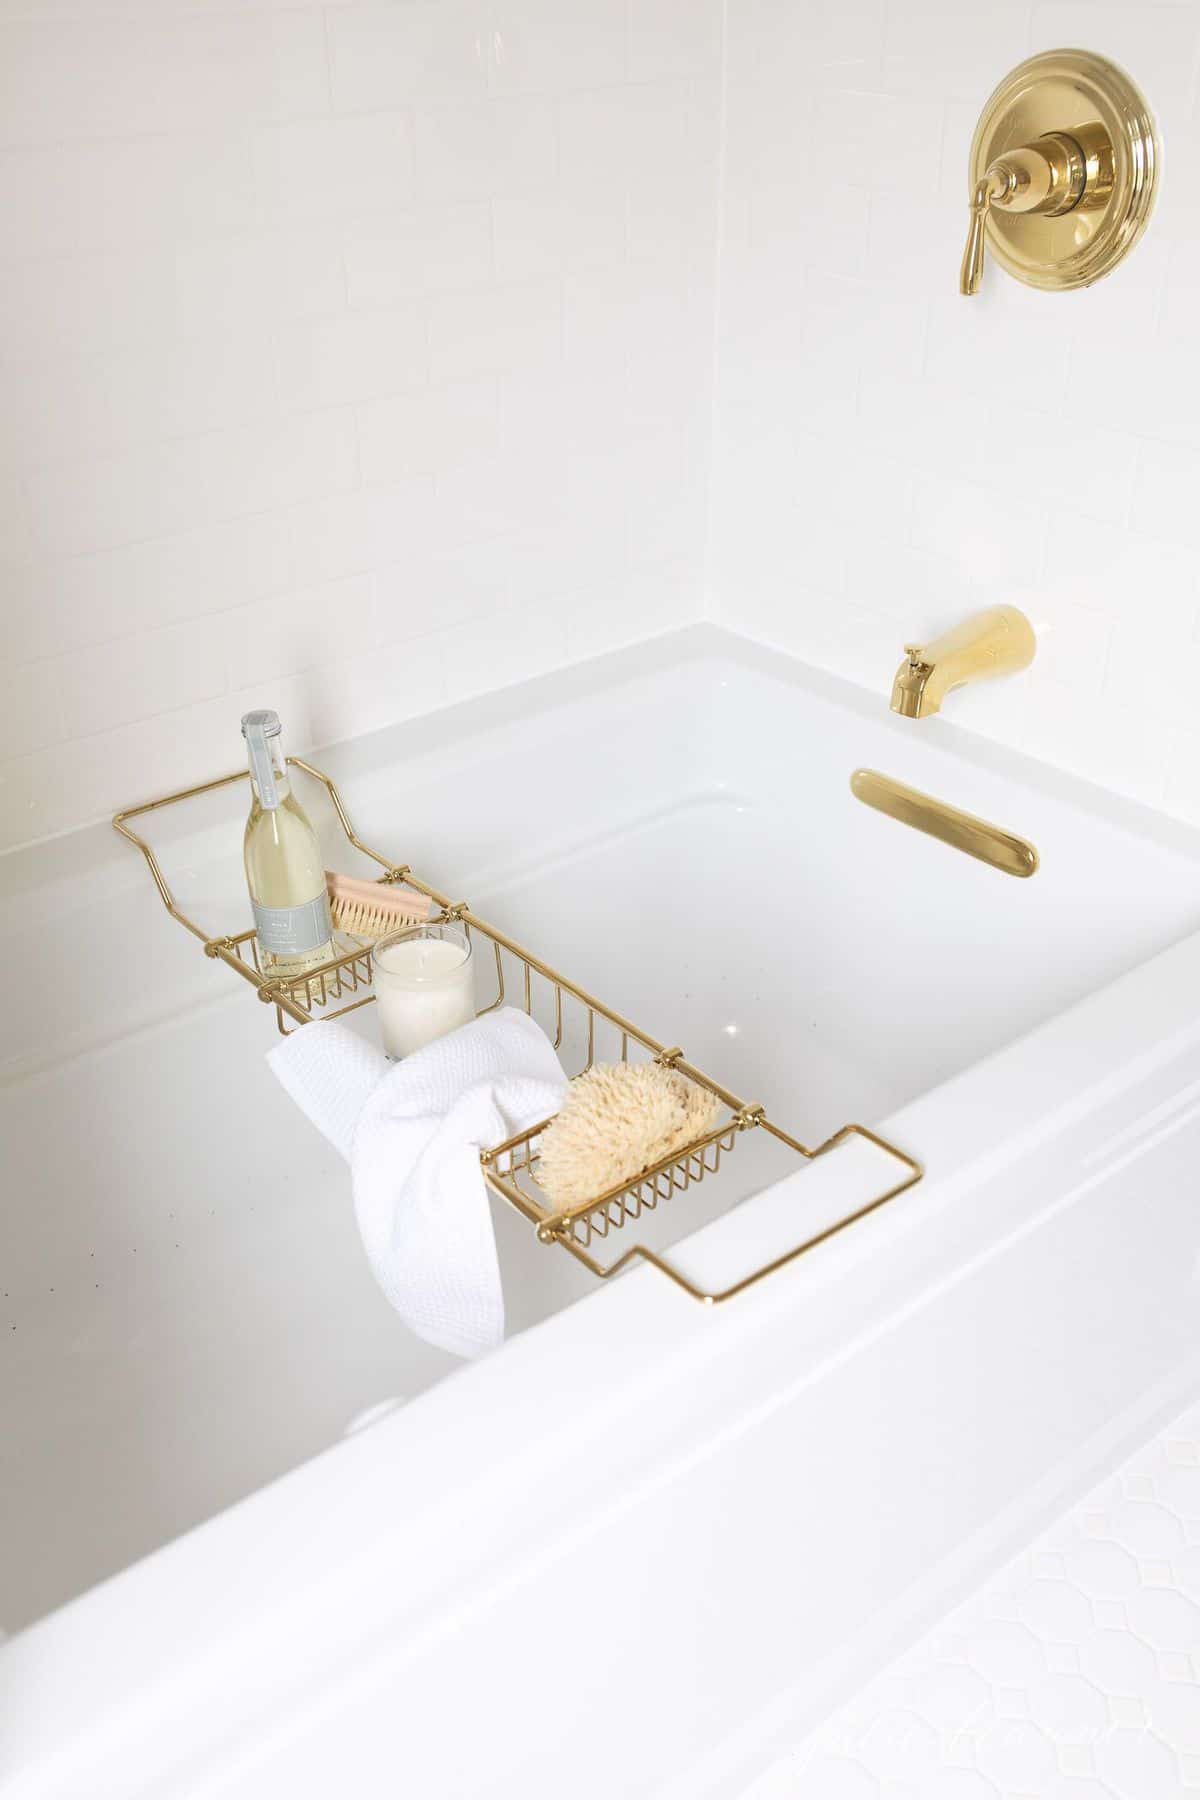 A brass bath tray with various items like a candle, champagne, sponge, and a wash cloth to make the ultimate bath experience. 